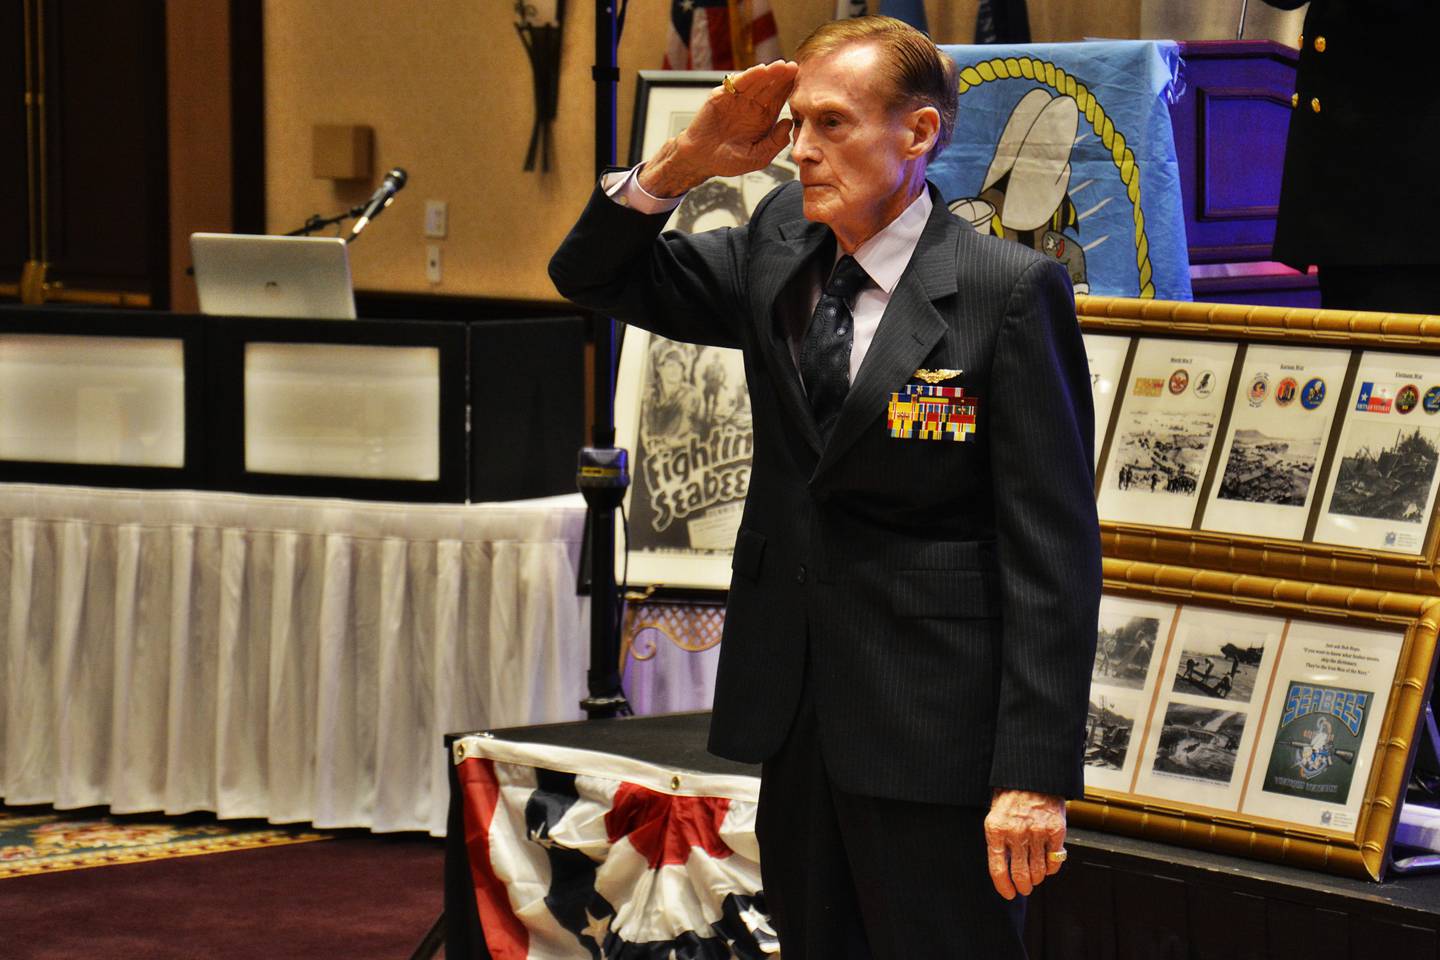 Jack Holder, a survivor of the attack on Pearl Harbor and the Battle of Midway was honored during a celebration of the Navy’s 239th birthday in Scottsdale, Ariz., on Oct. 11, 2014.